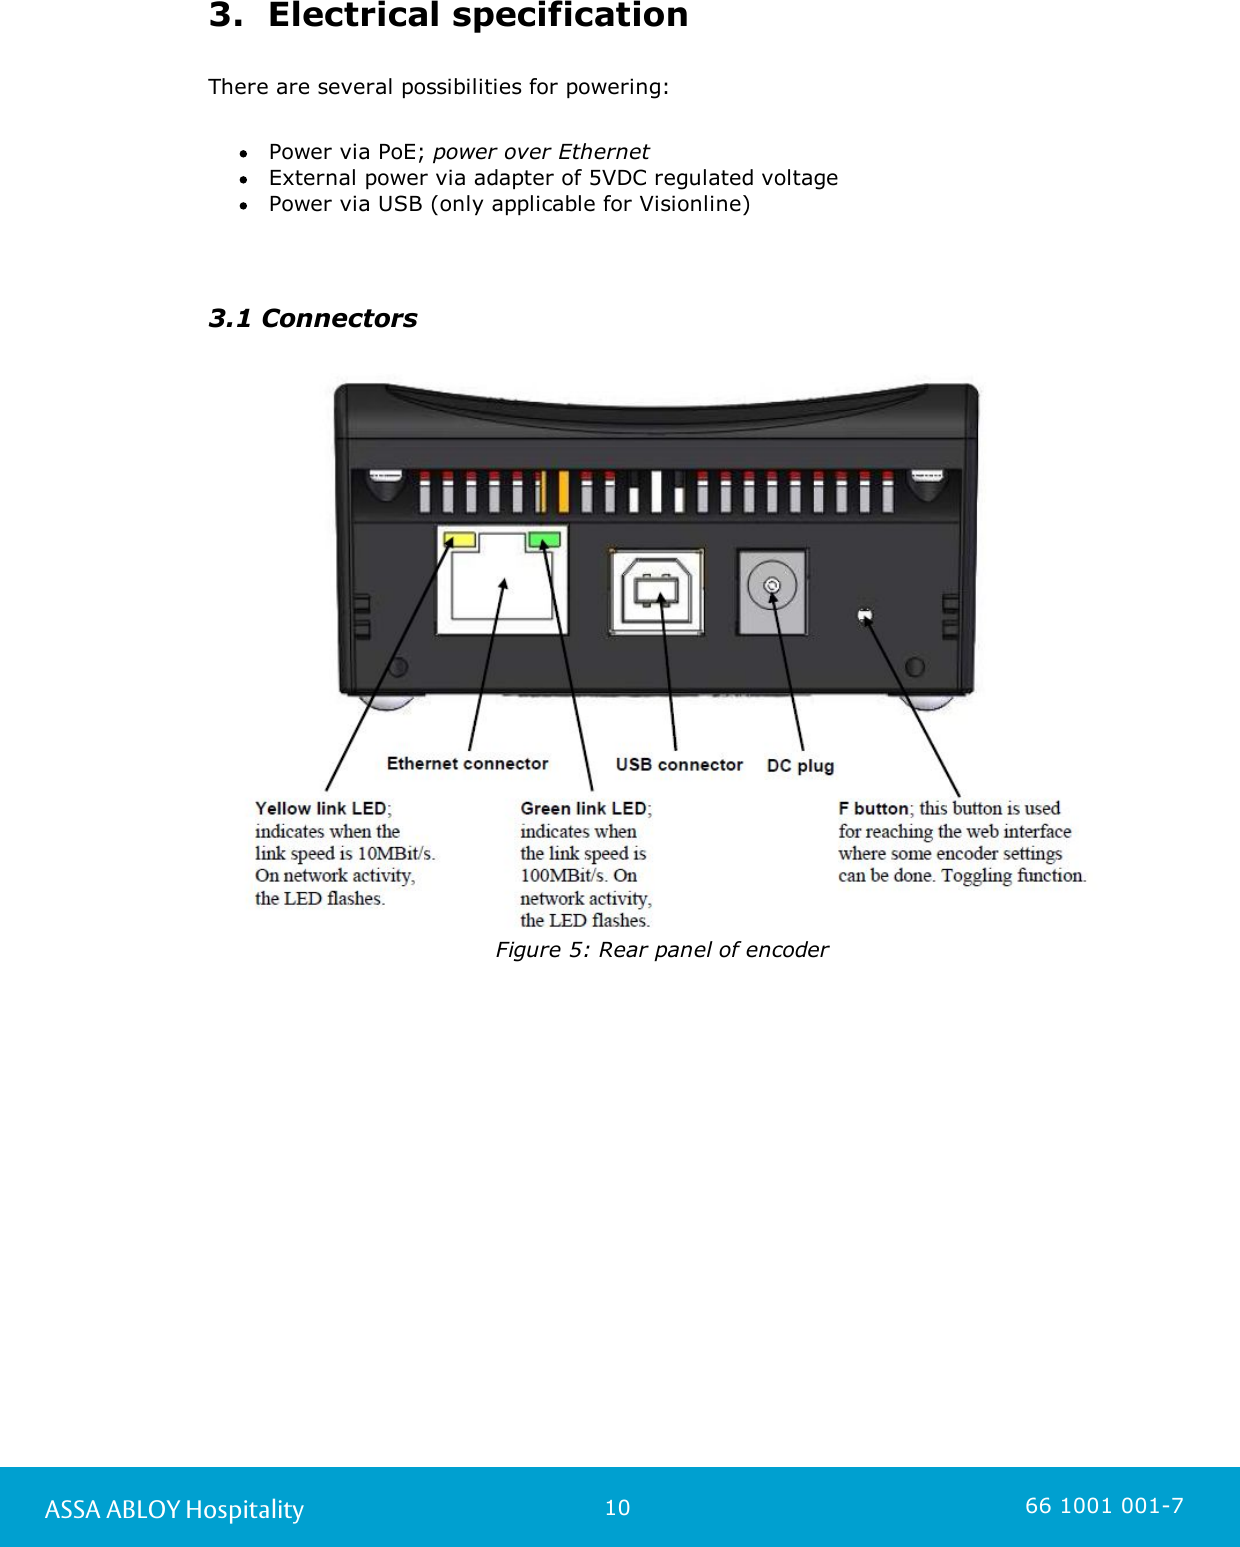 10ASSA ABLOY Hospitality 66 1001 001-73.  Electrical specificationThere are several possibilities for powering:Power via PoE; power over EthernetExternal power via adapter of 5VDC regulated voltage Power via USB (only applicable for Visionline)3.1 ConnectorsFigure 5: Rear panel of encoder